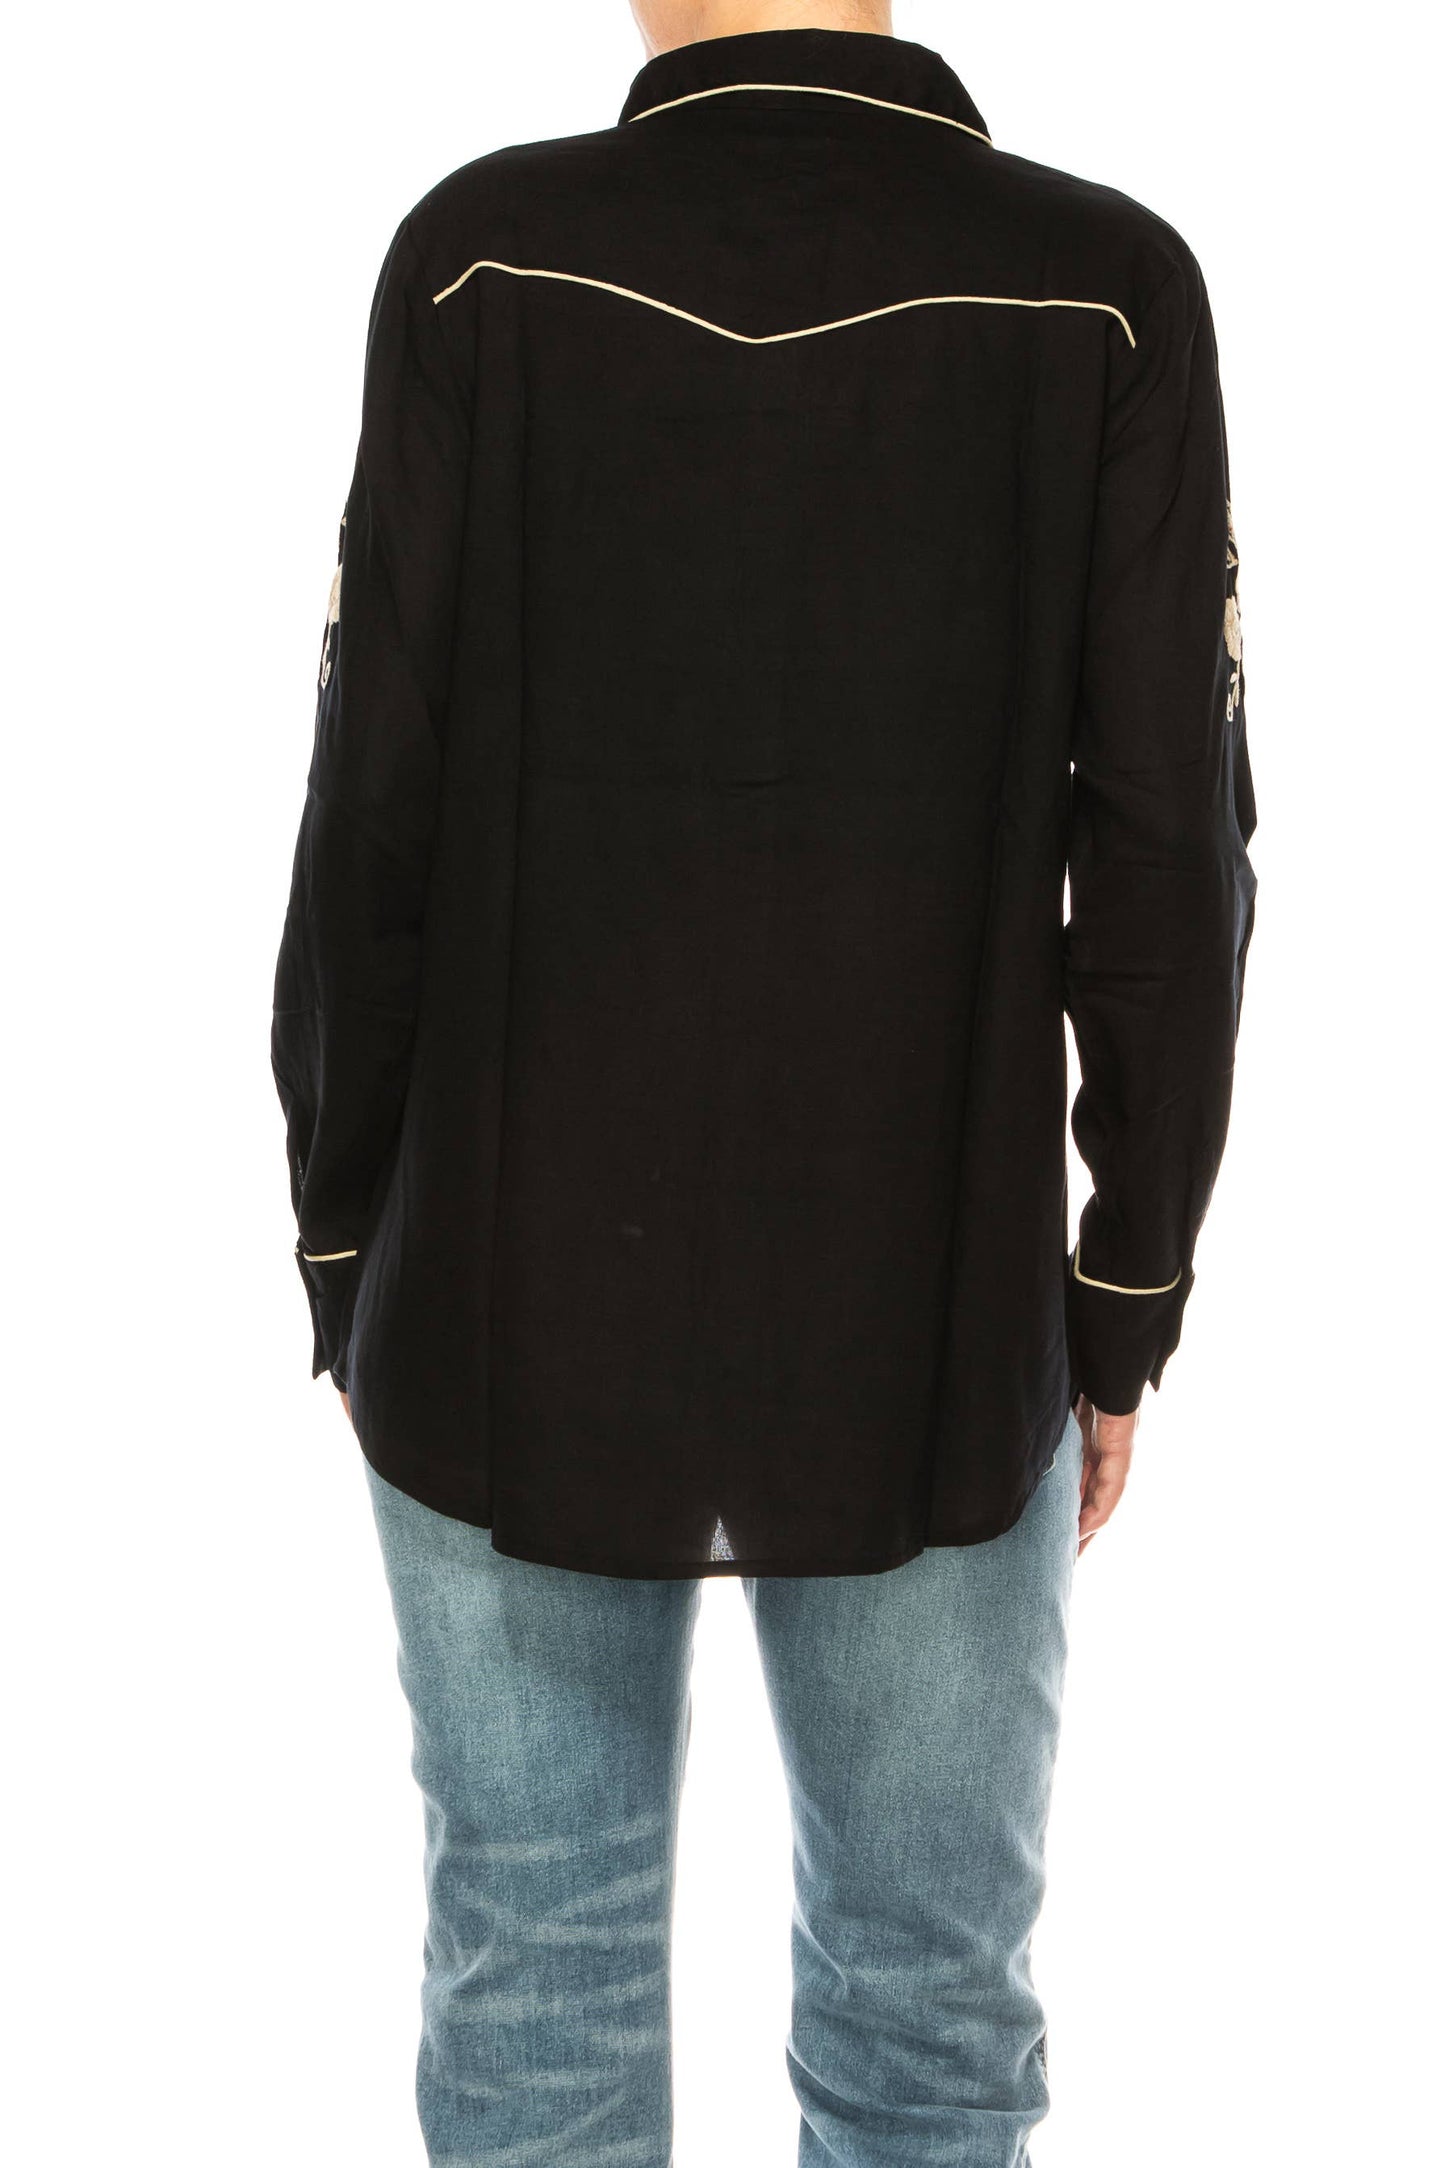 Magazine Clothing - Black Western Shirt with Embroidery: Small